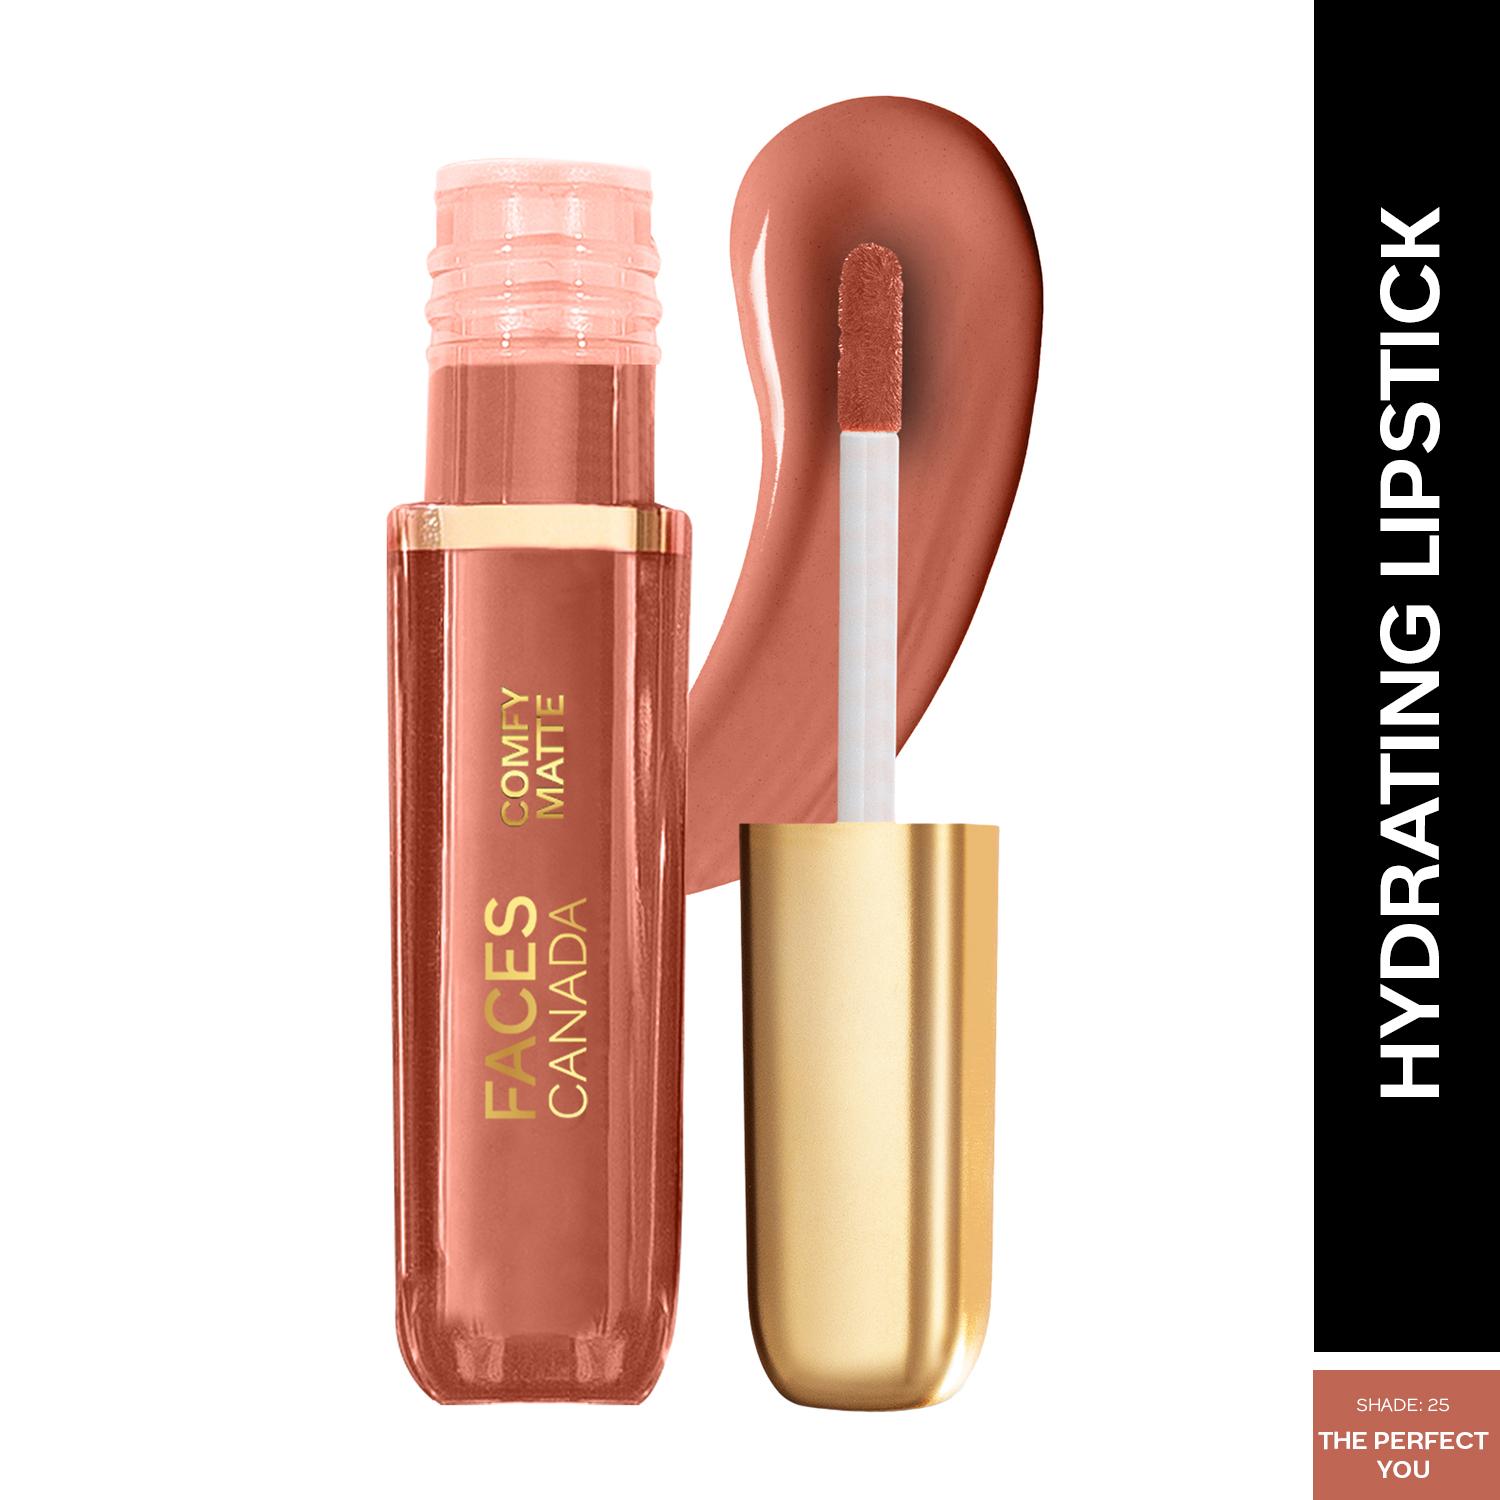 Faces Canada | Faces Canada Comfy Matte Liquid Lipstick, 10HR Stay, No Dryness - The Perfect You 25 (3 ml)